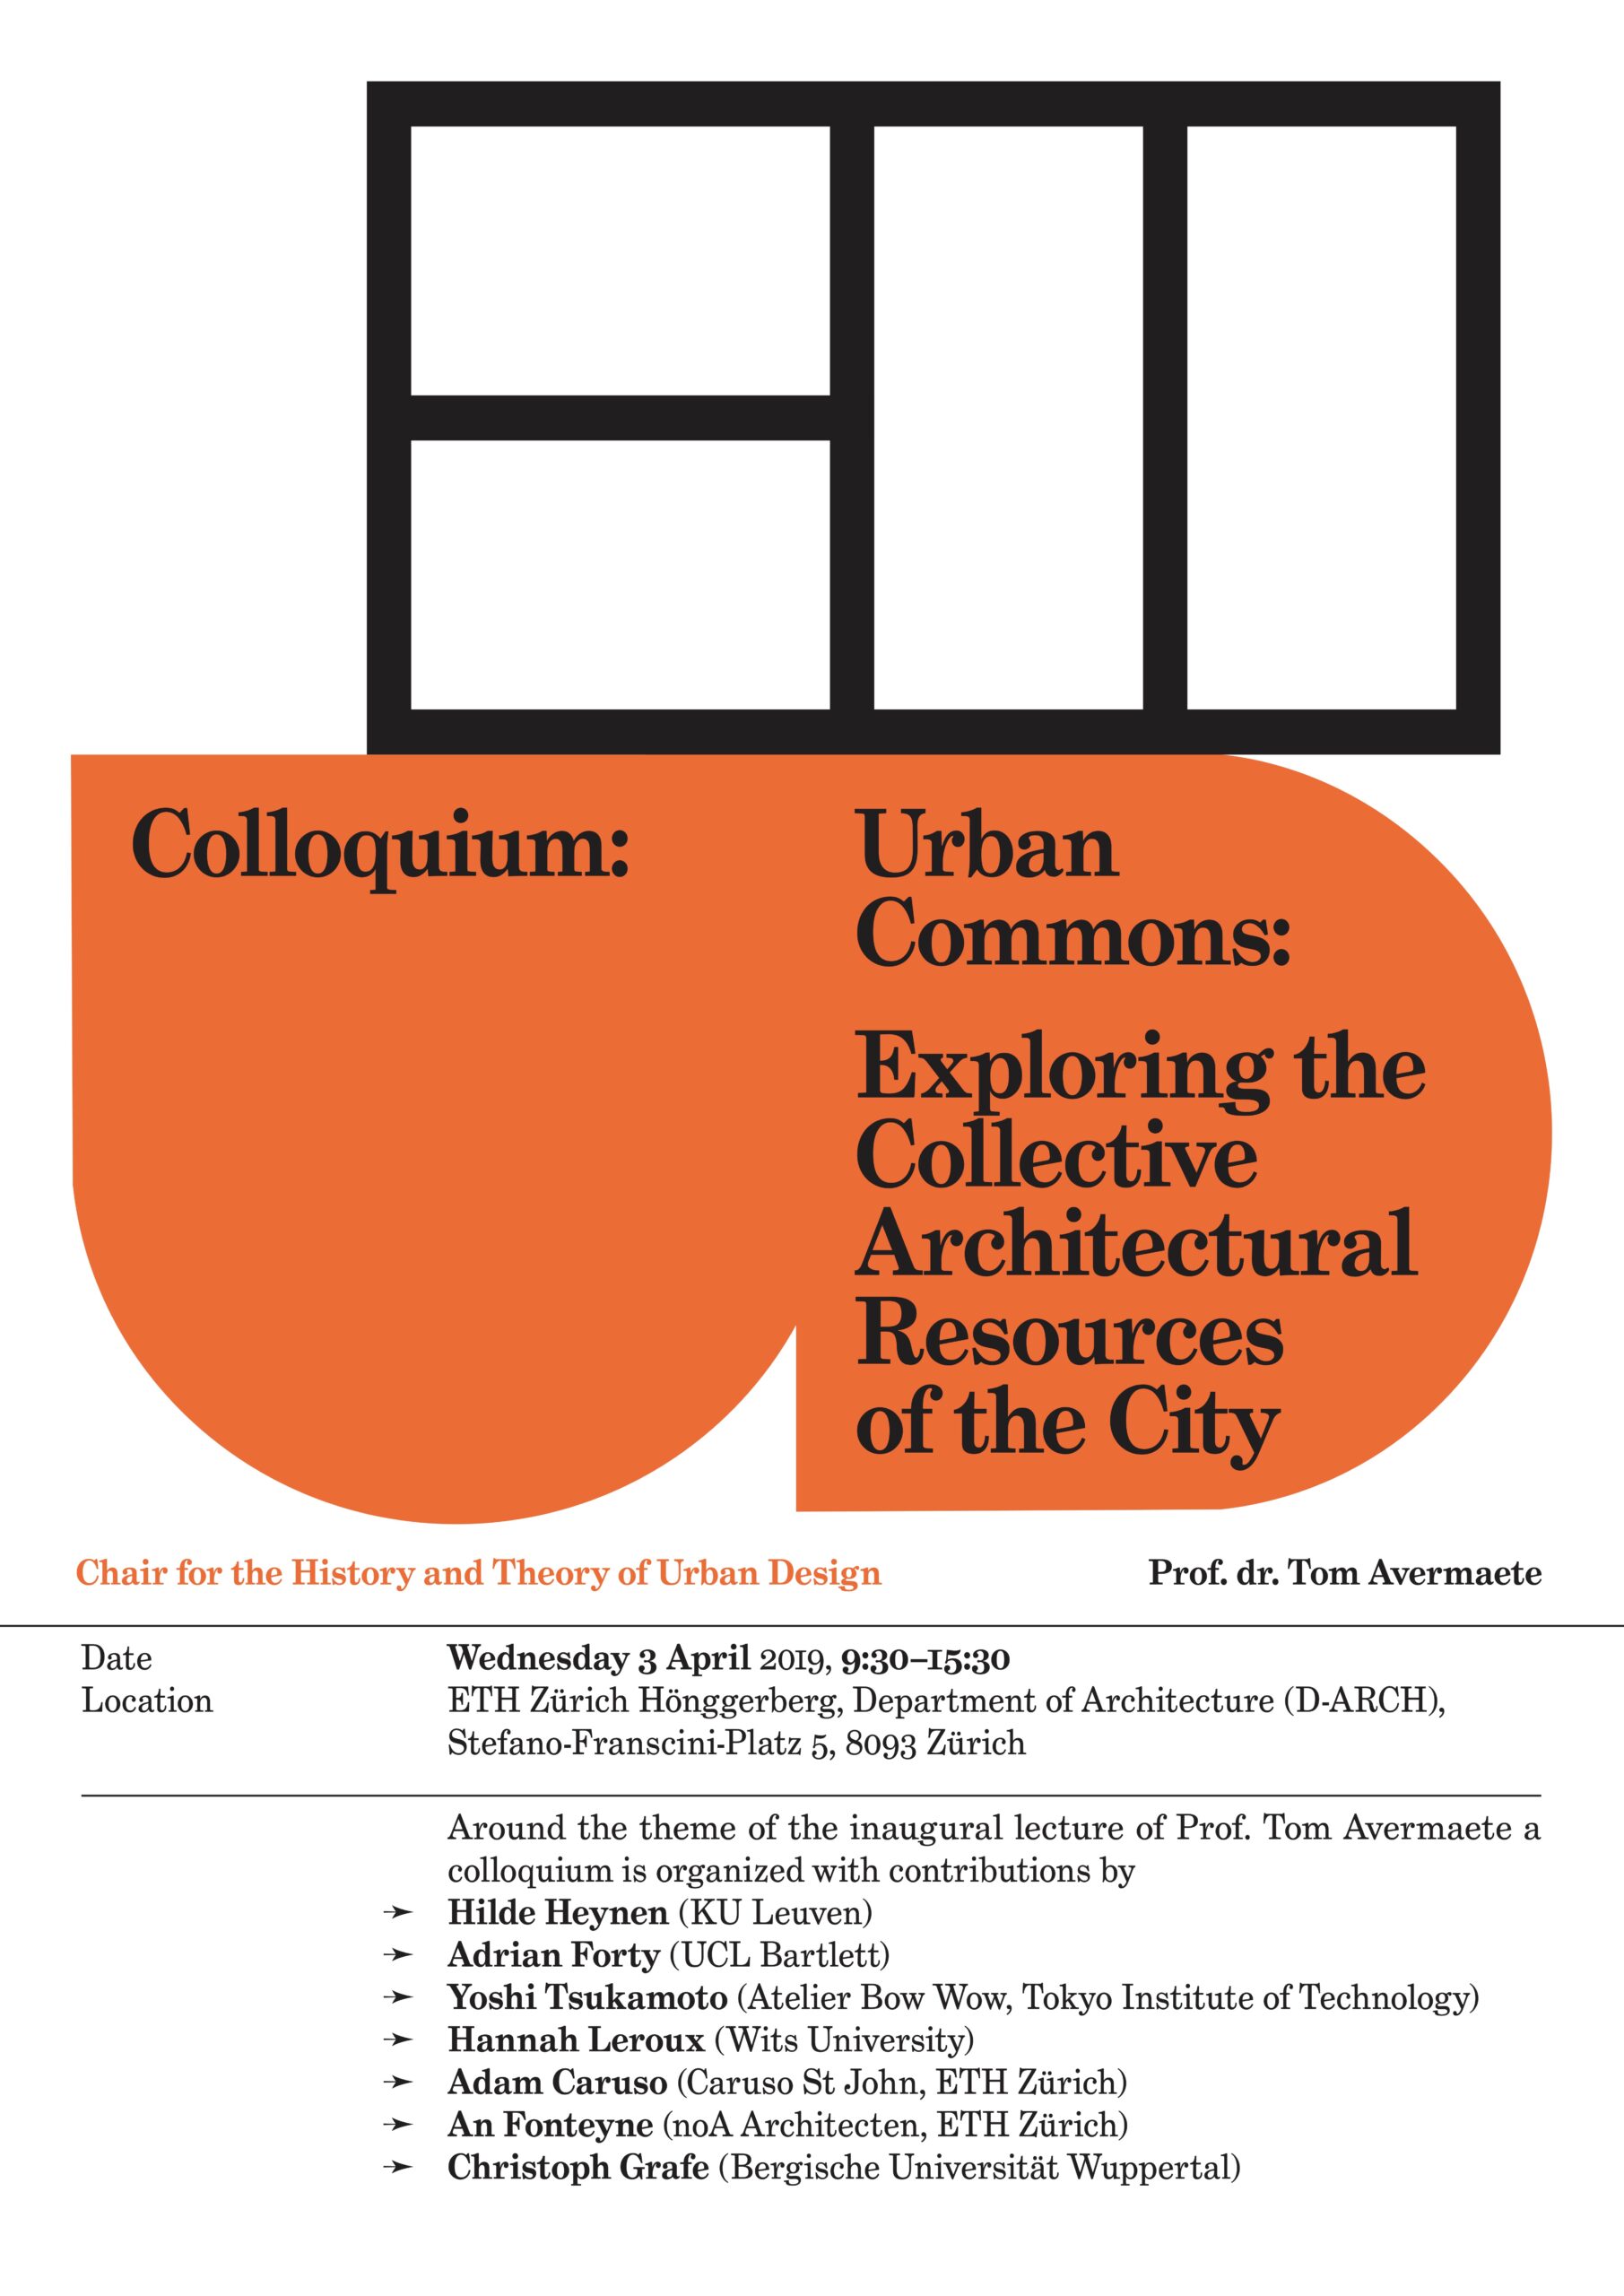 Urban Commons: Exploring the Collective Architectural Resources of the City